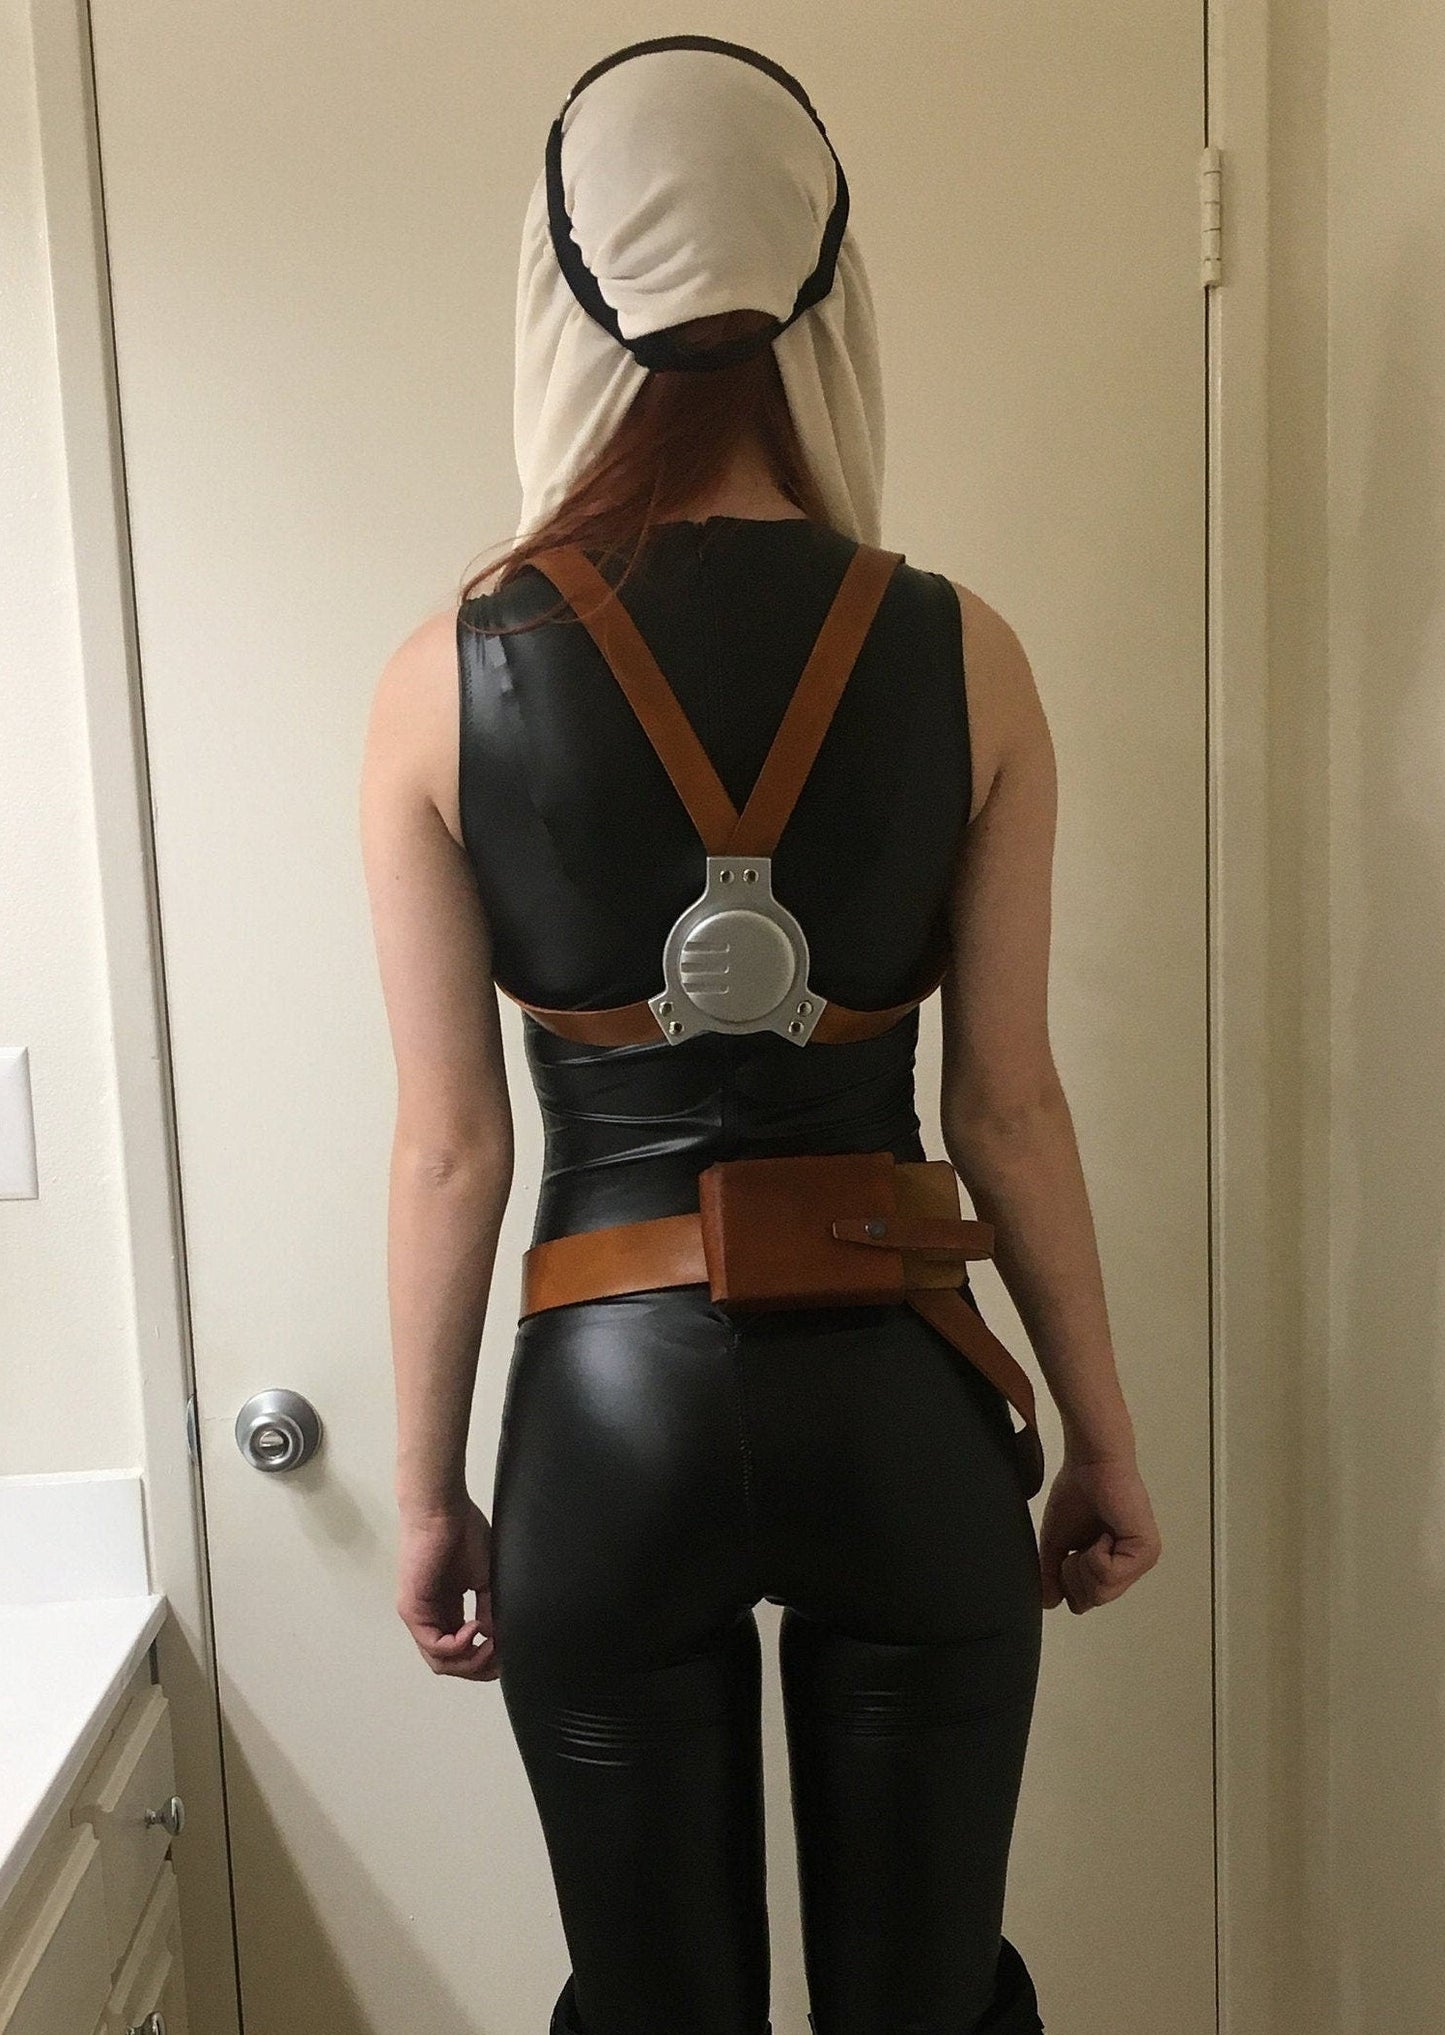 Mara Jade Belt, Rear Holdout holster Rig with Matching arm bands and Harness Set